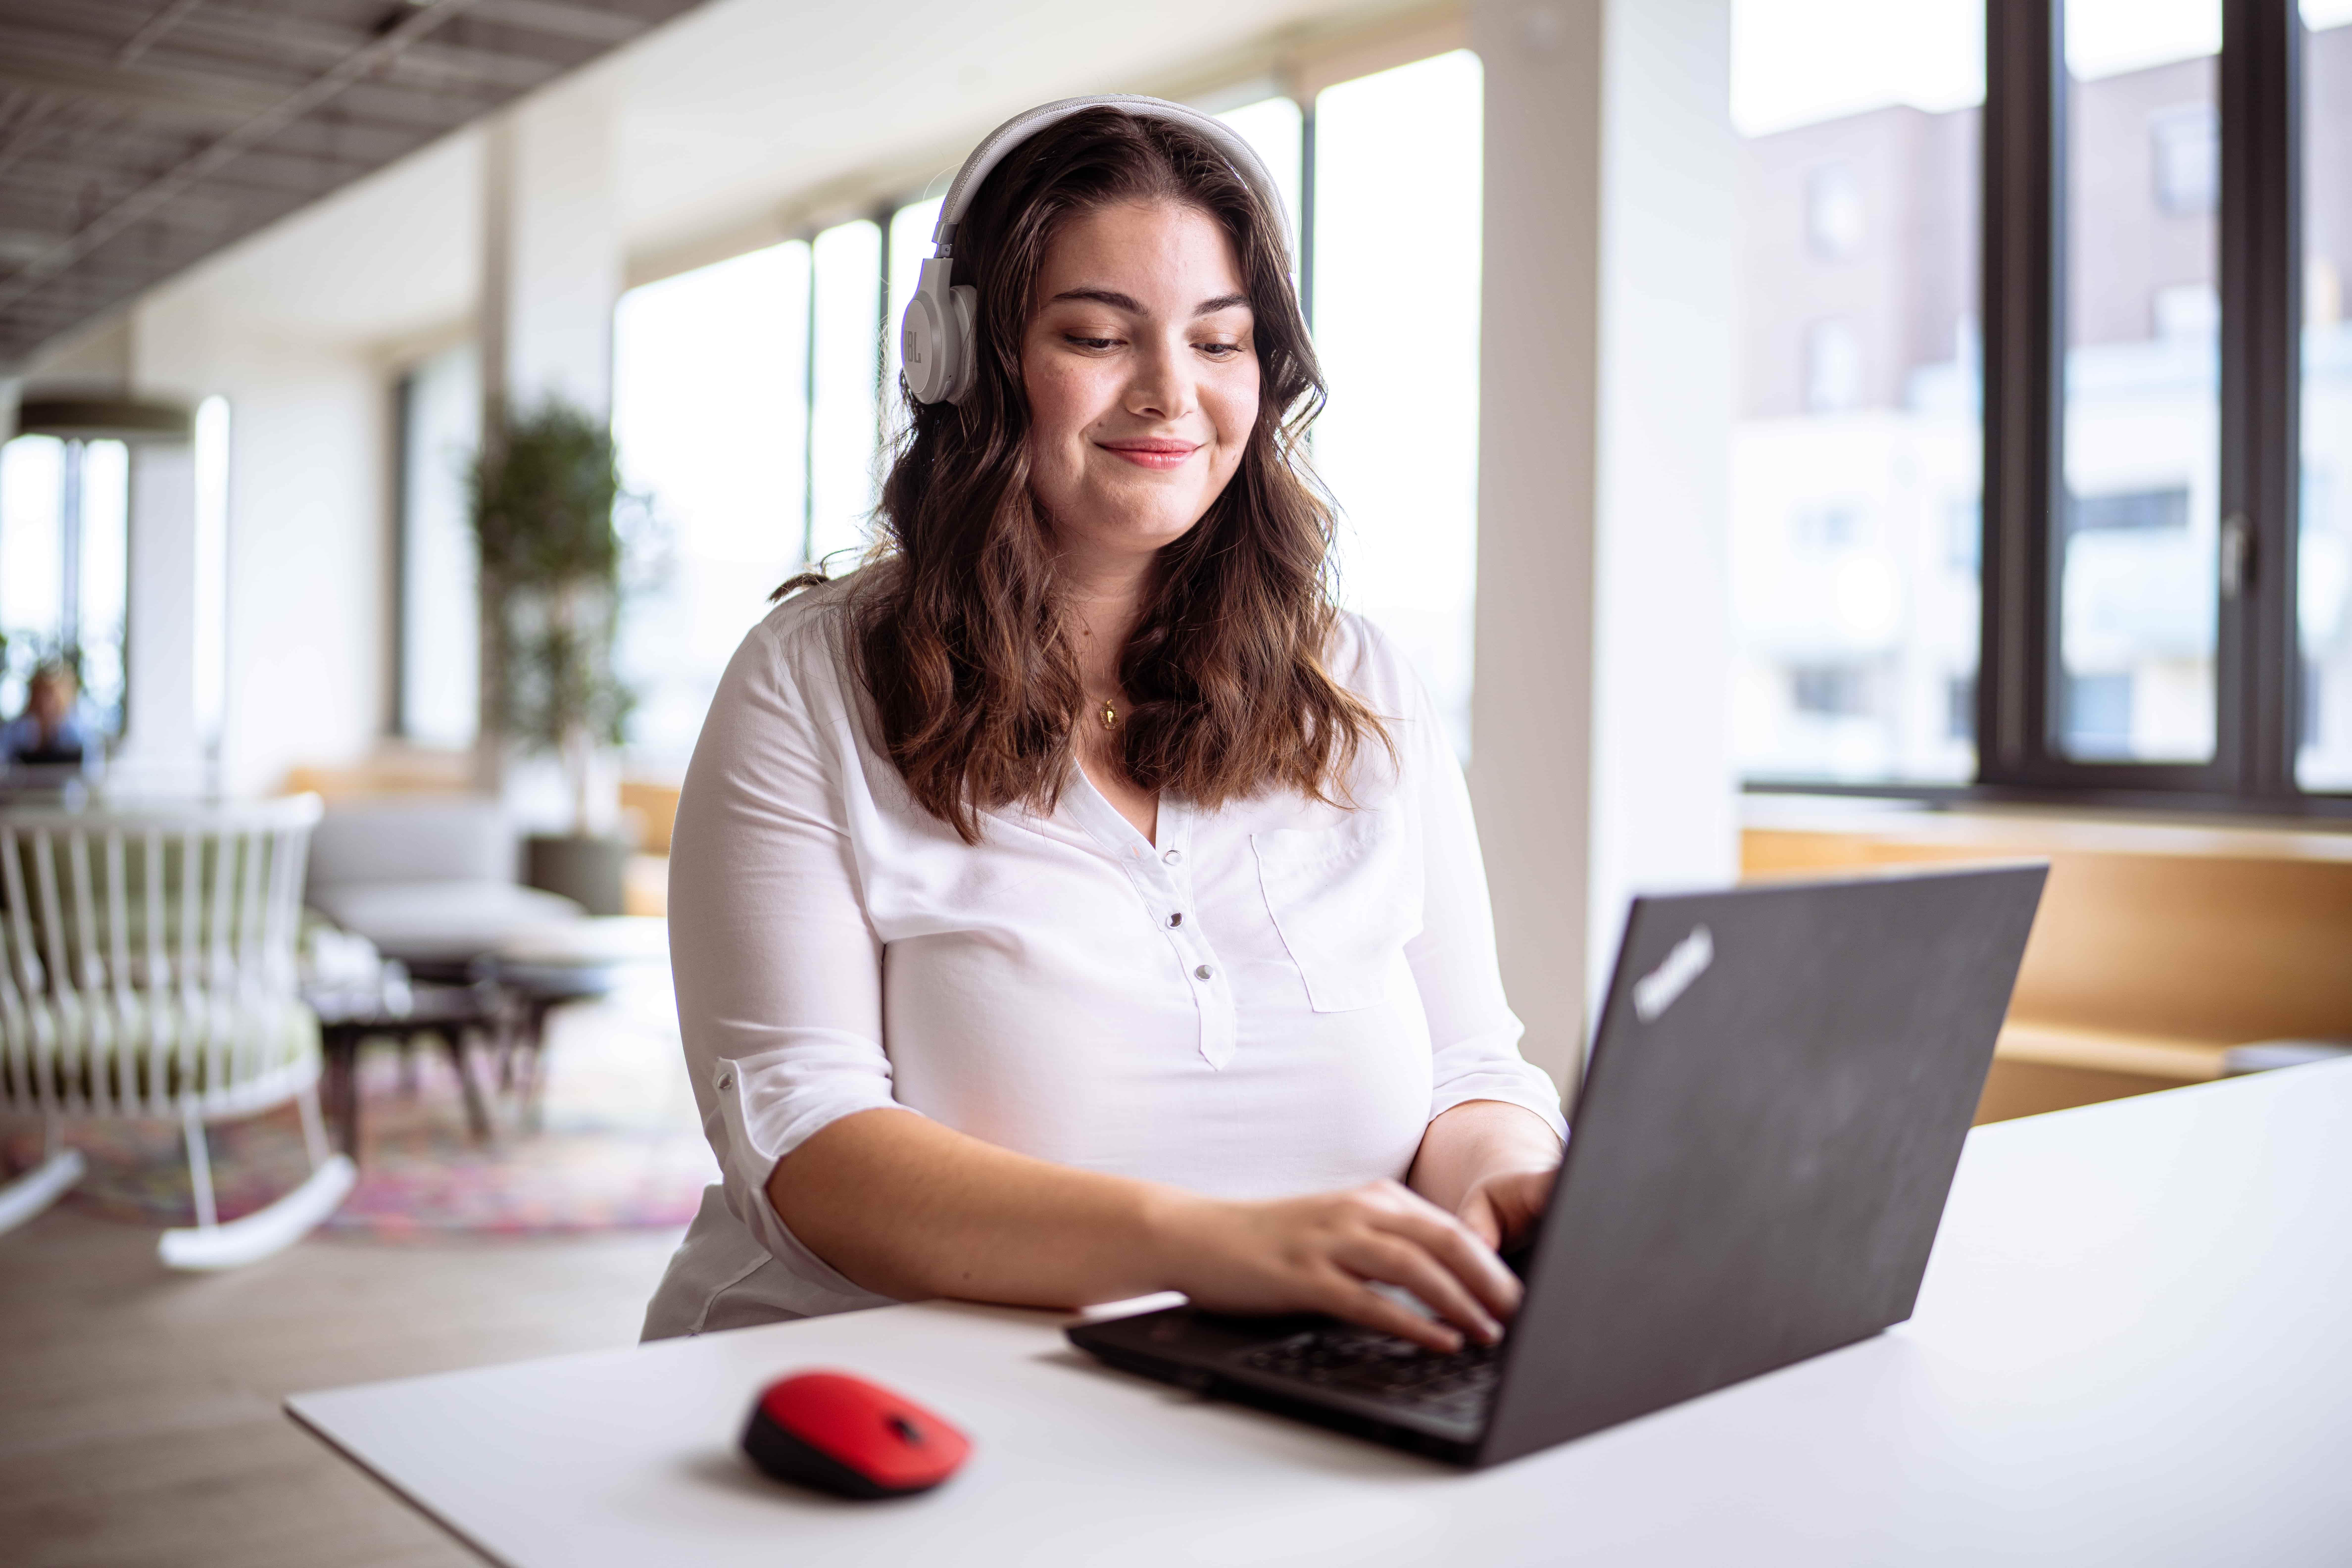 A woman wearing headphones smiling at her laptop sat in the office